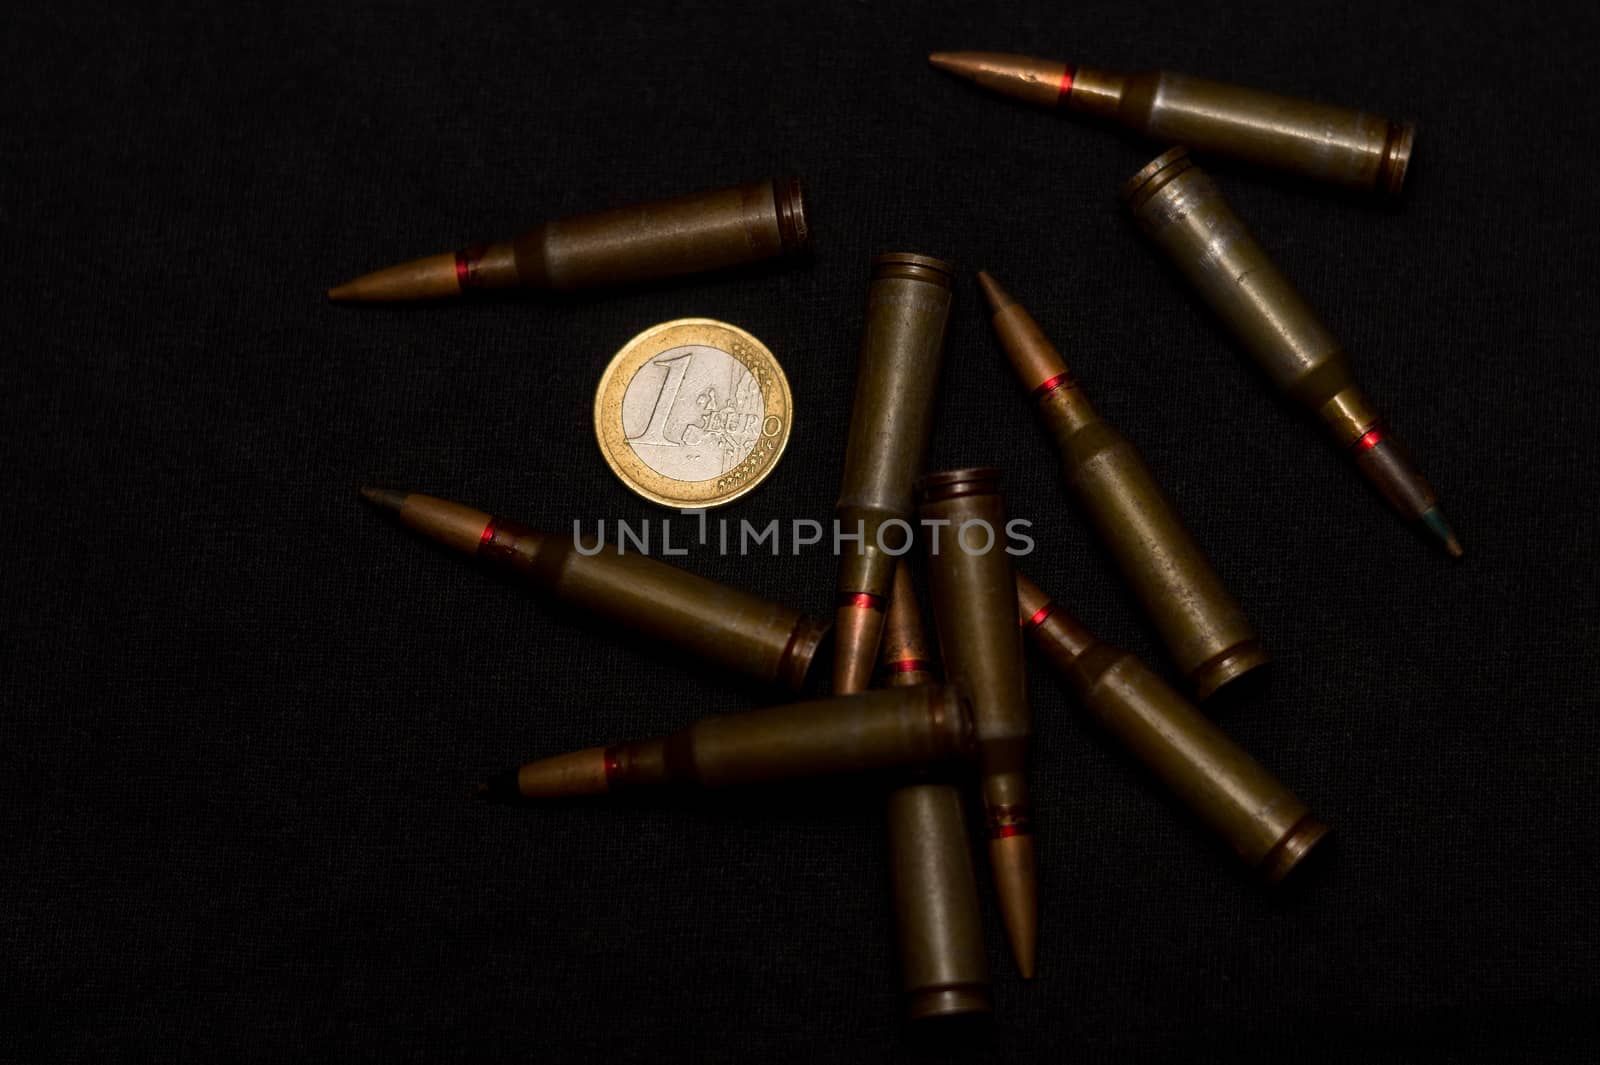 Rifle ammo around one euro coin on black background. Symbolizes the war for money and one of the world's problems.